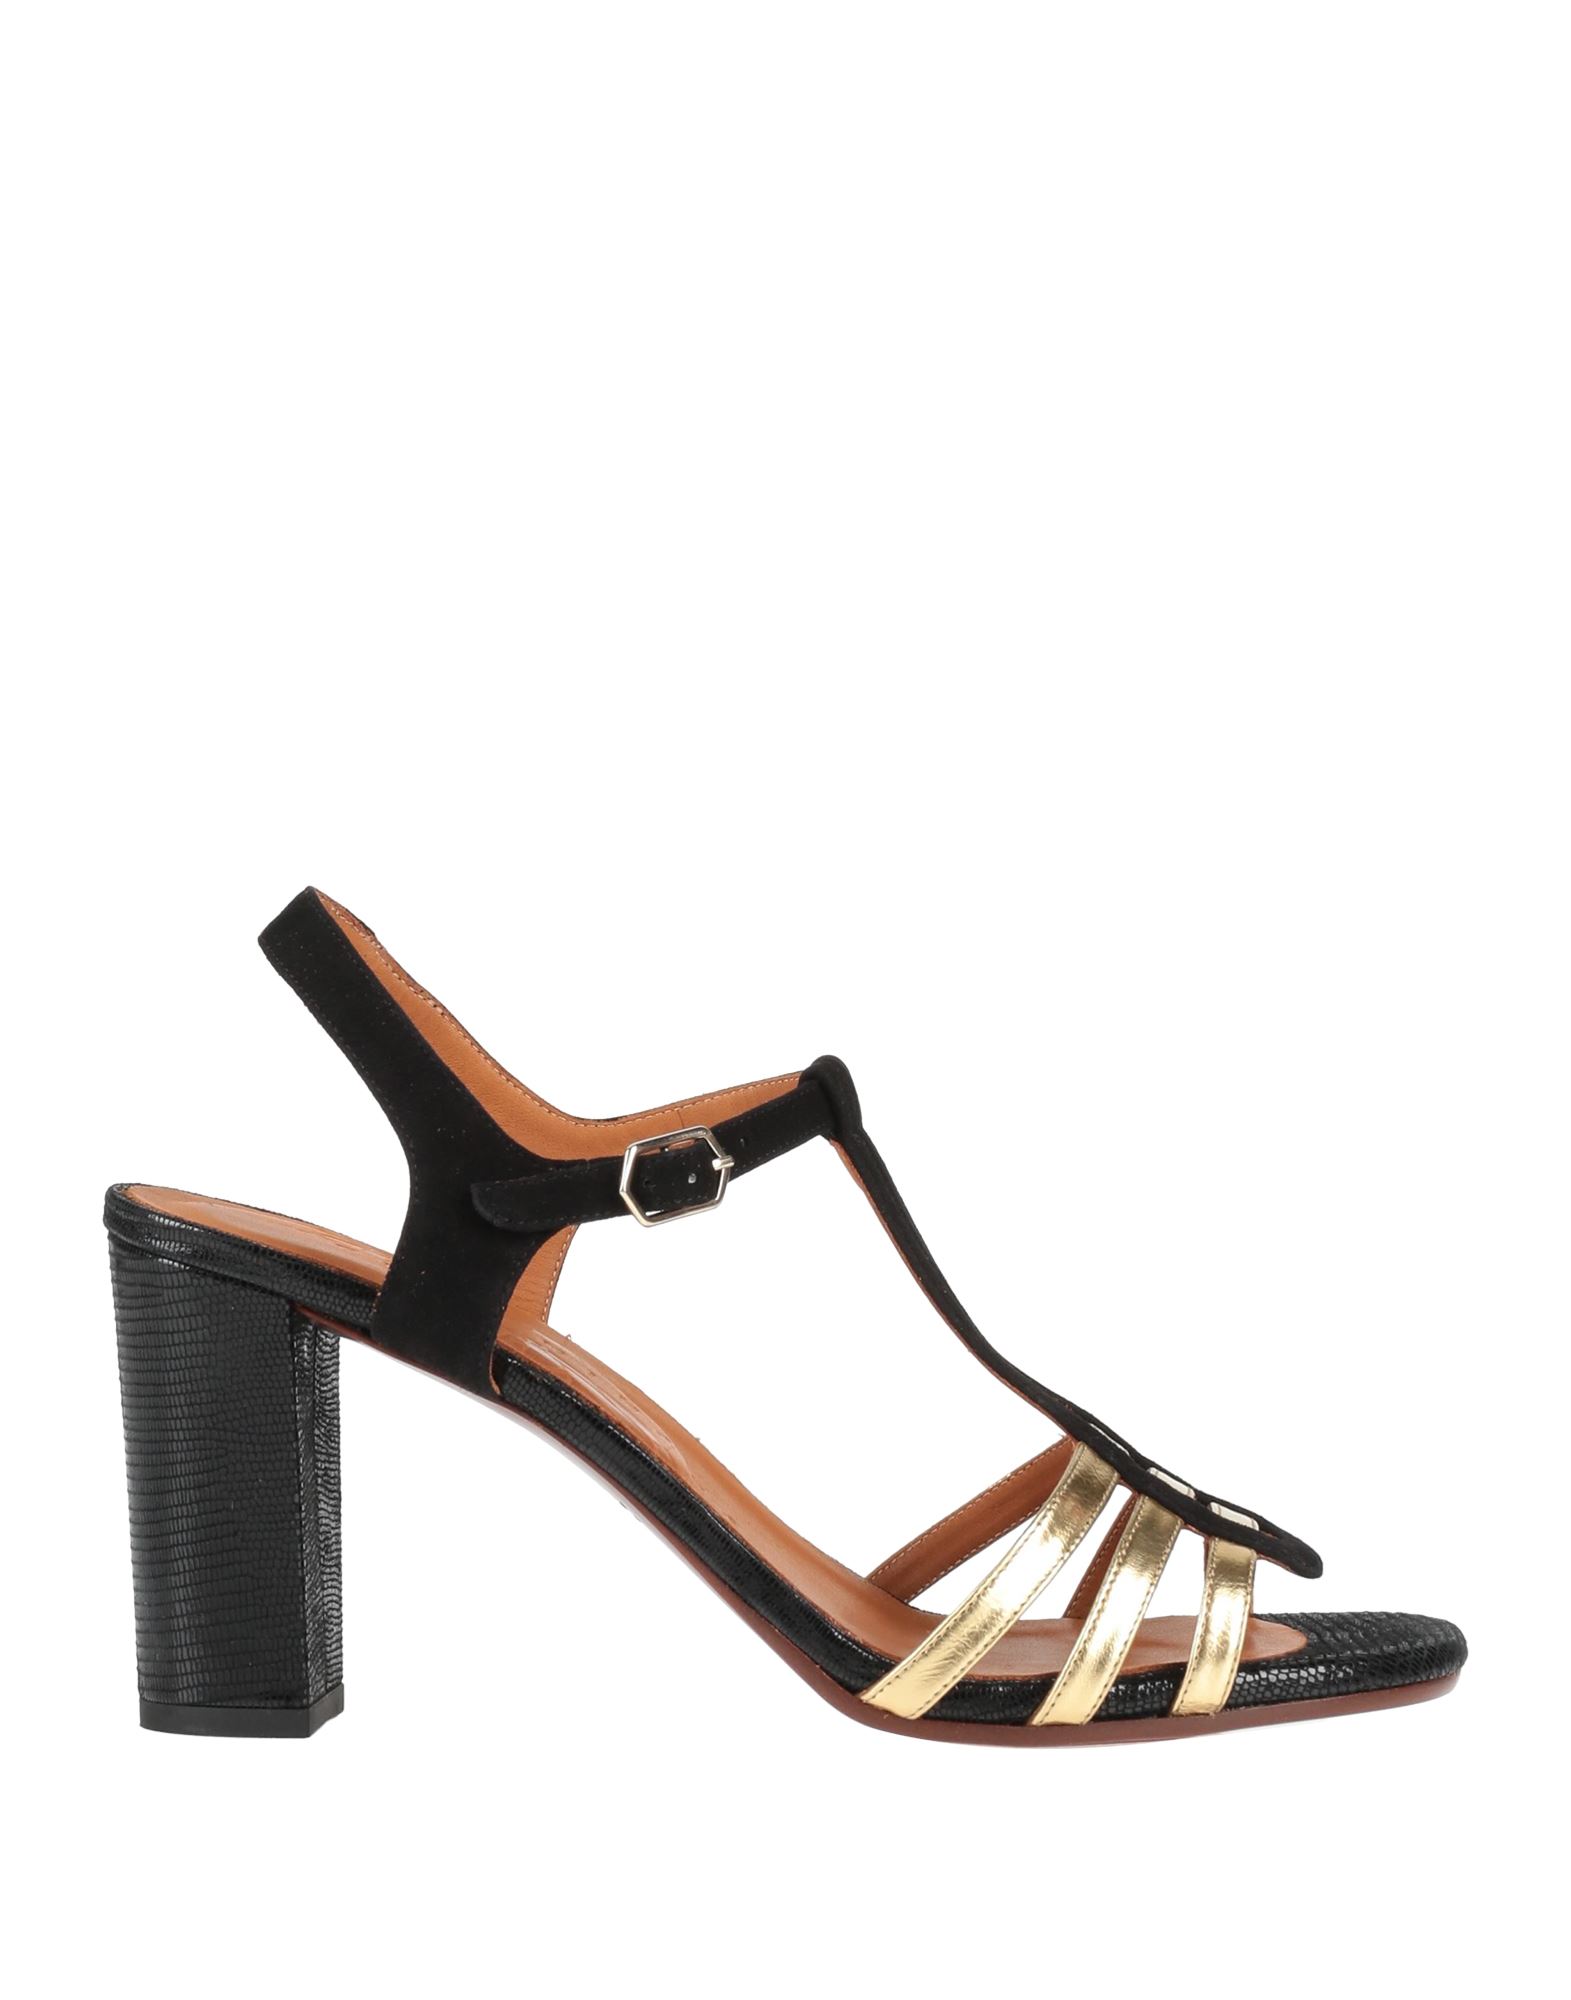 Chie Mihara Babi Suede And Leather Sandals In Black,gold